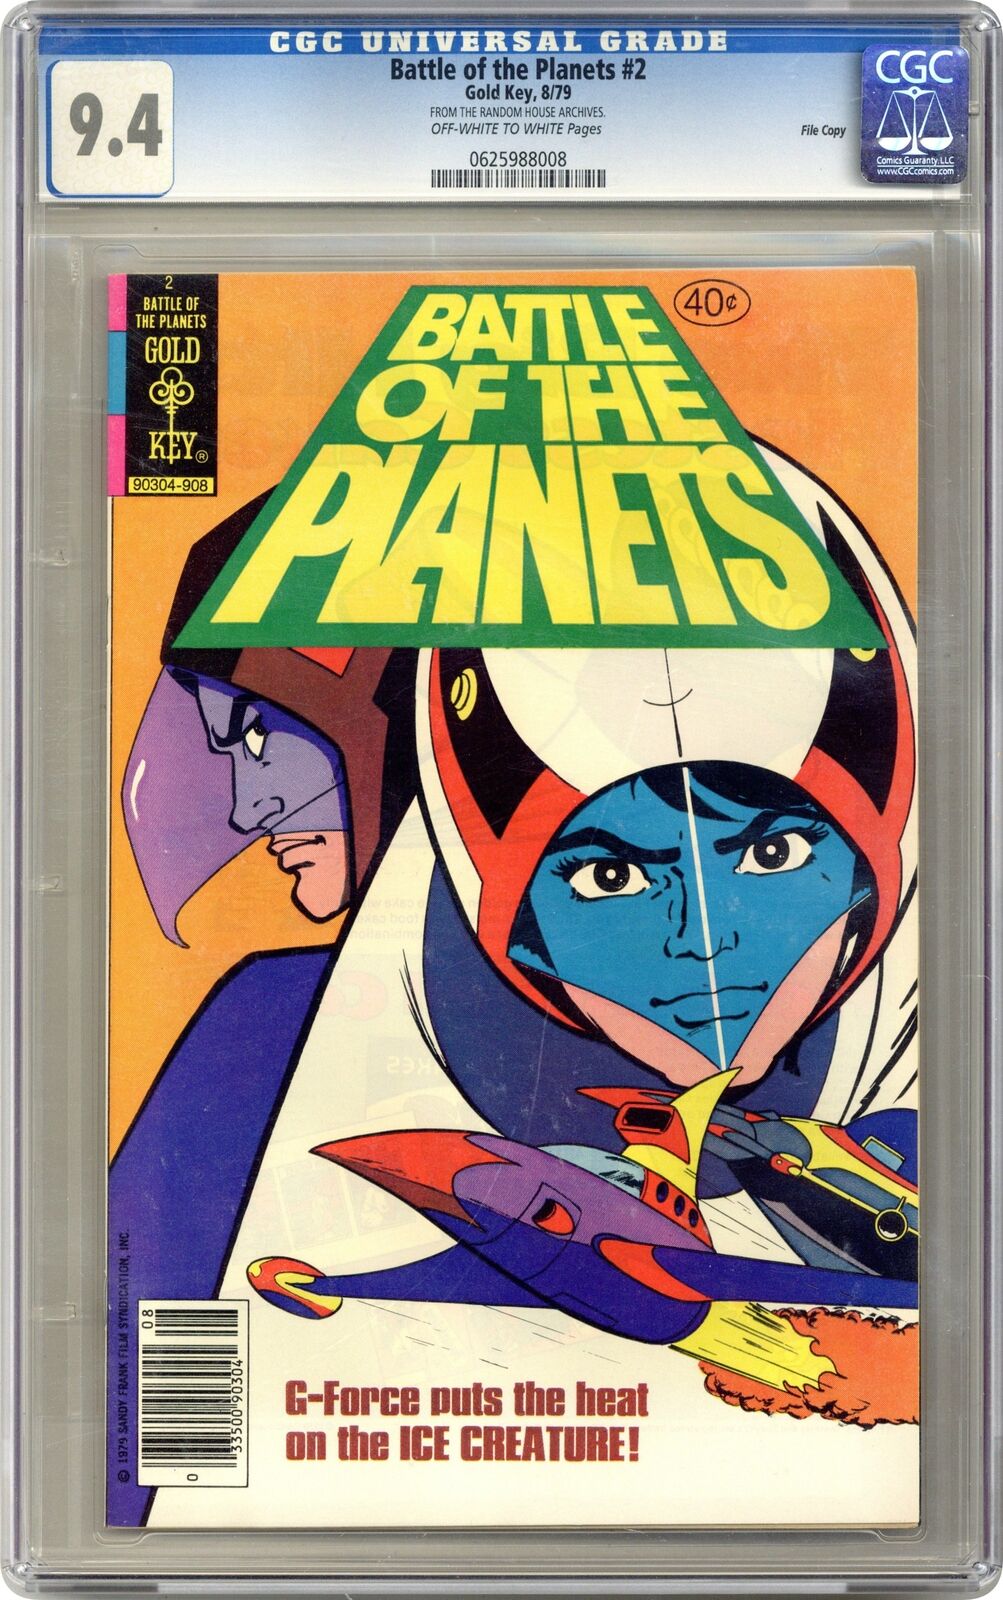 Battle of the Planets #2 CGC 9.4 1979 Gold Key 0625988008